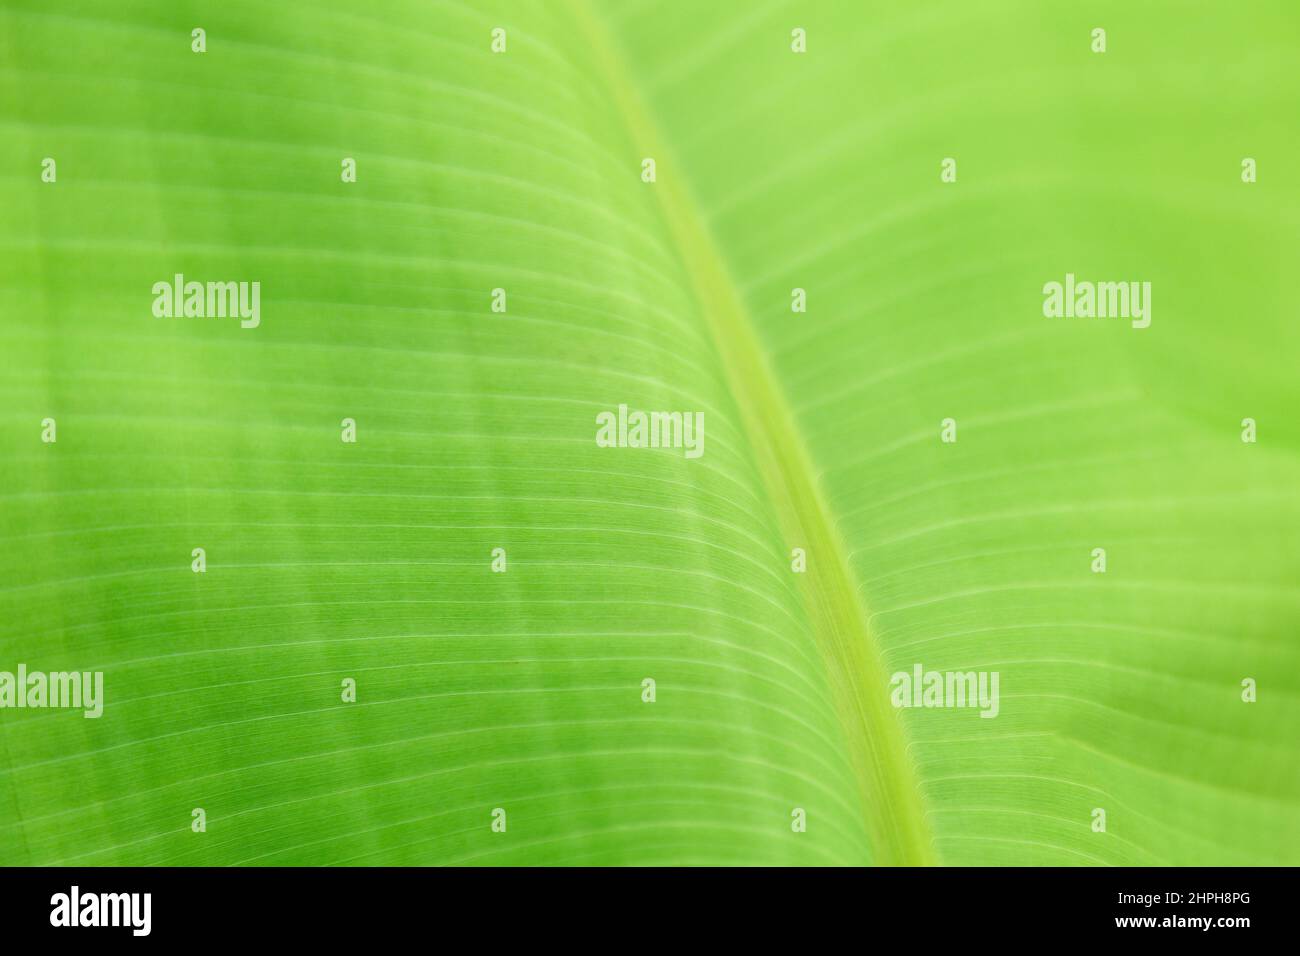 Tropical banana palm tree green leaf Close up texture as background. Natural eco background of exotic banana palm leaves plant foliage texture. Summer Stock Photo